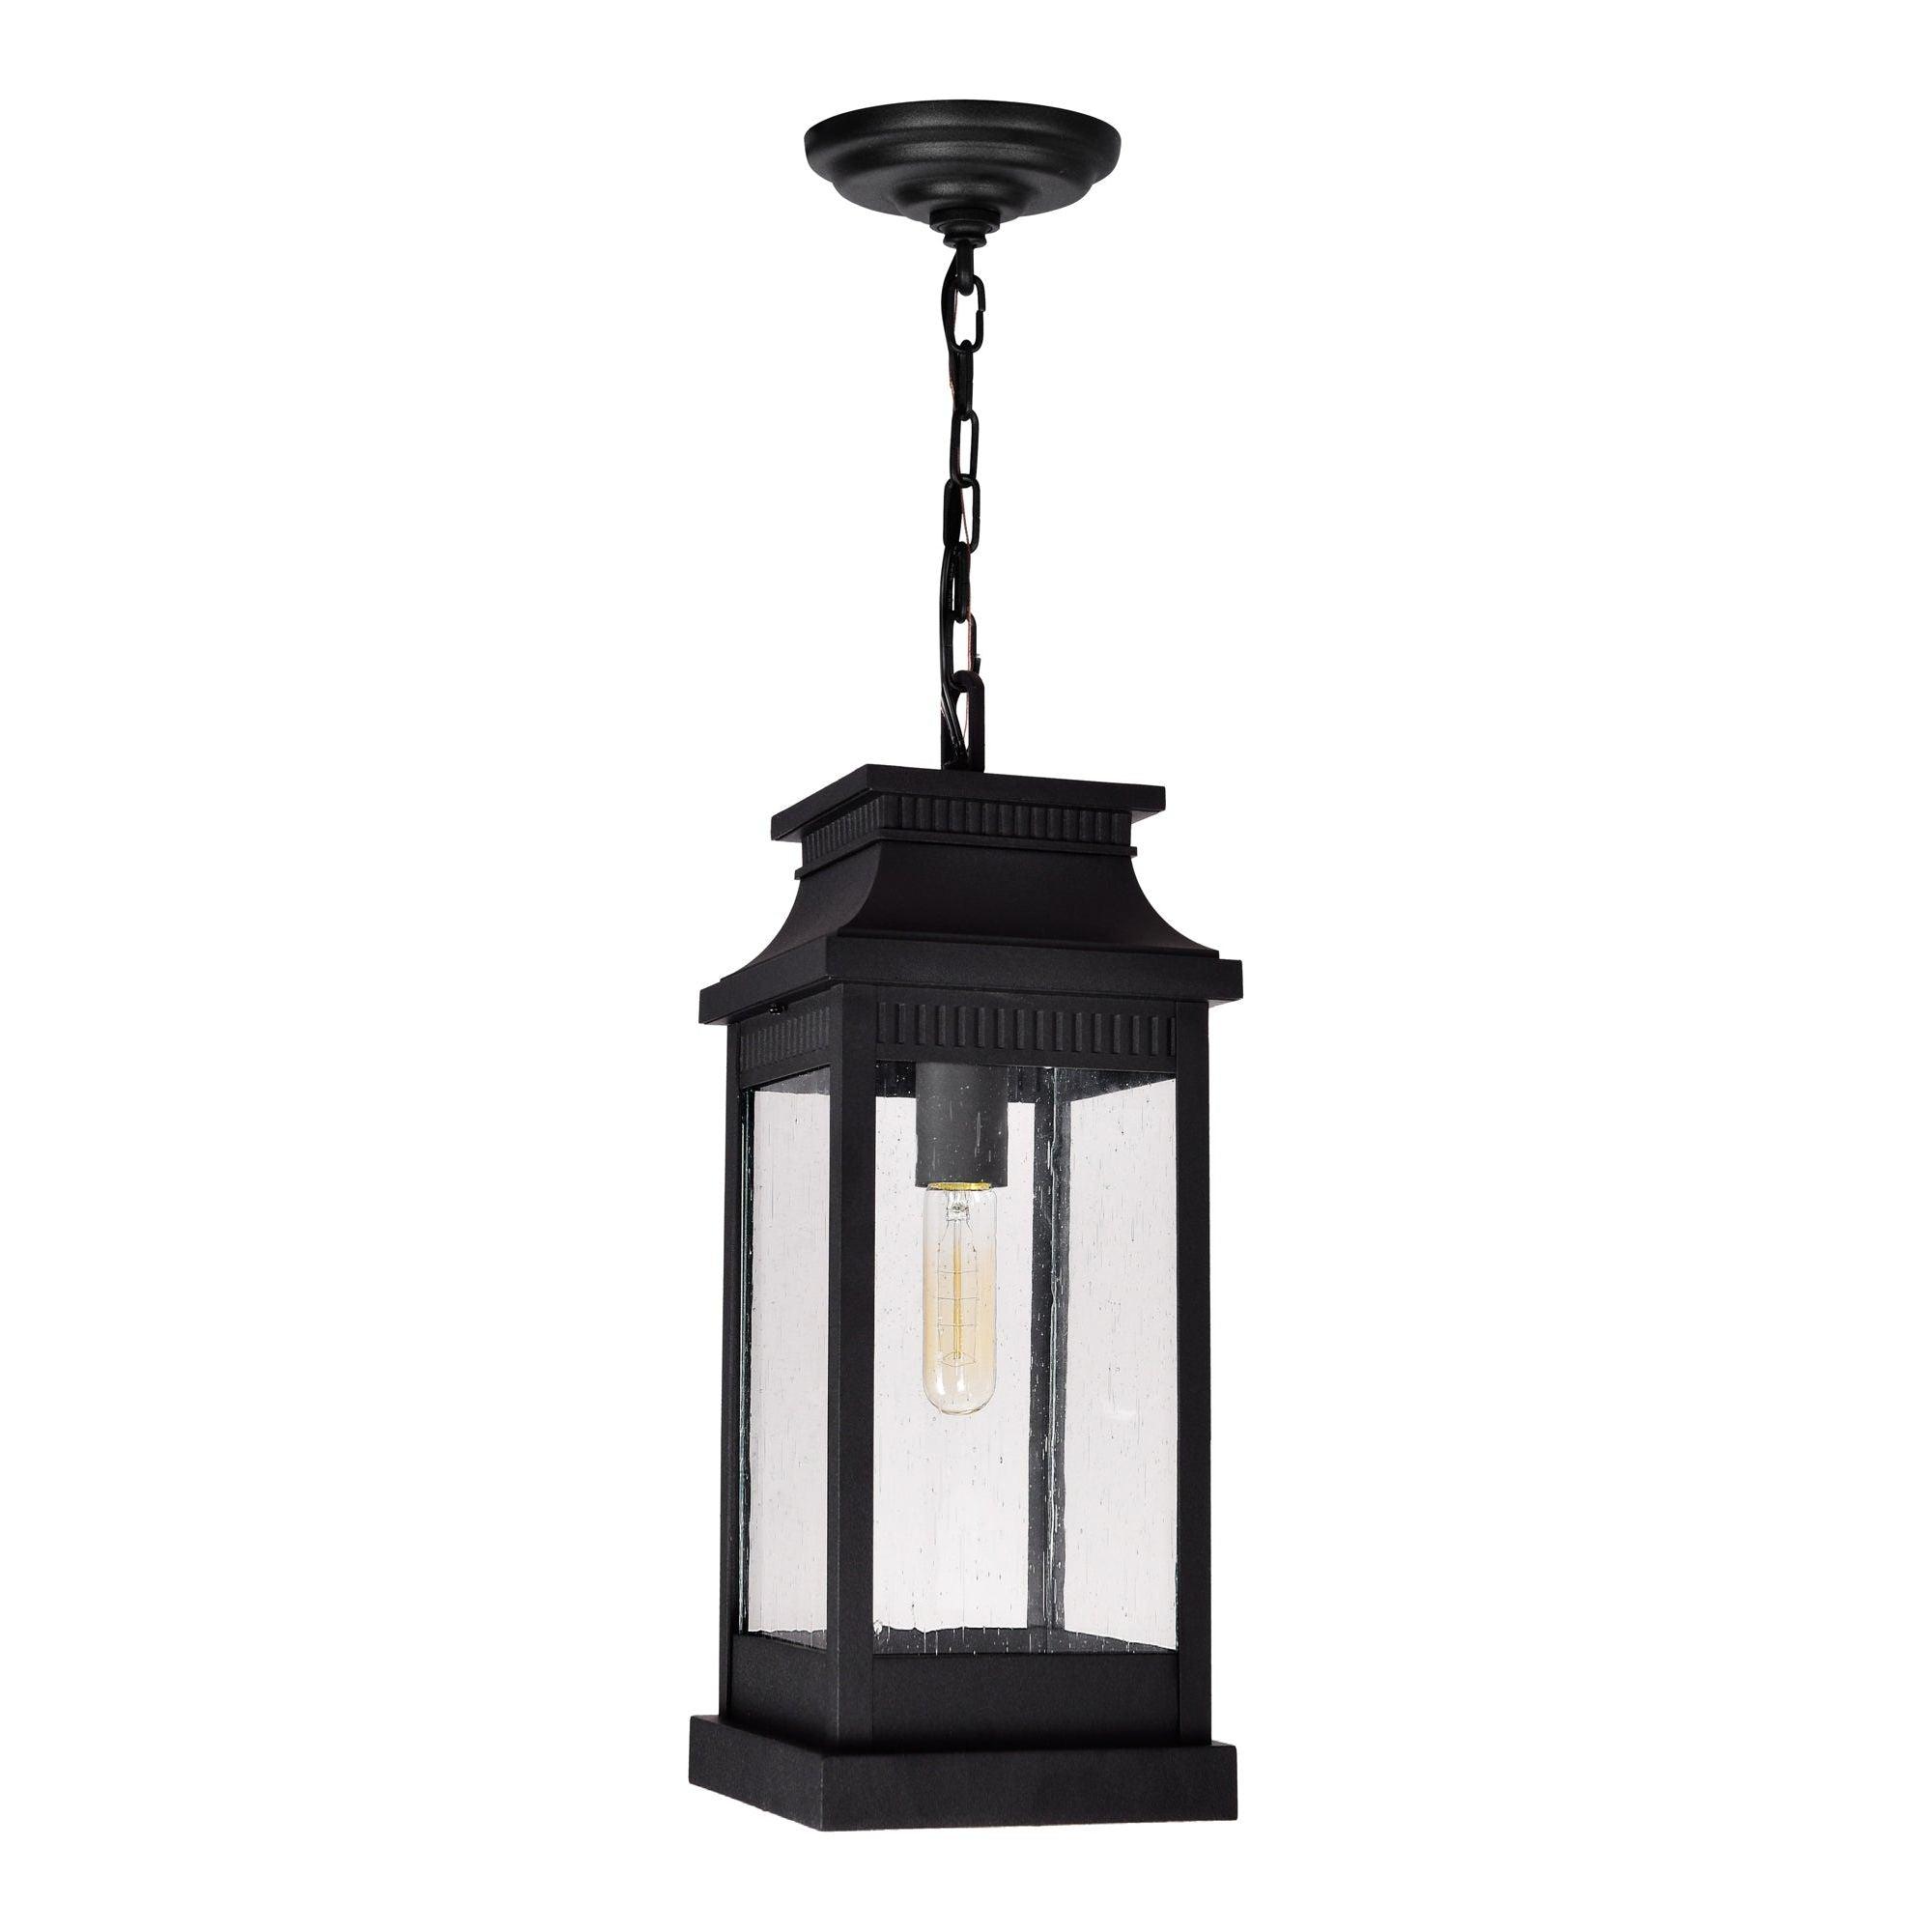 CWI - Milford 1-Light Outdoor Pendant - Lights Canada